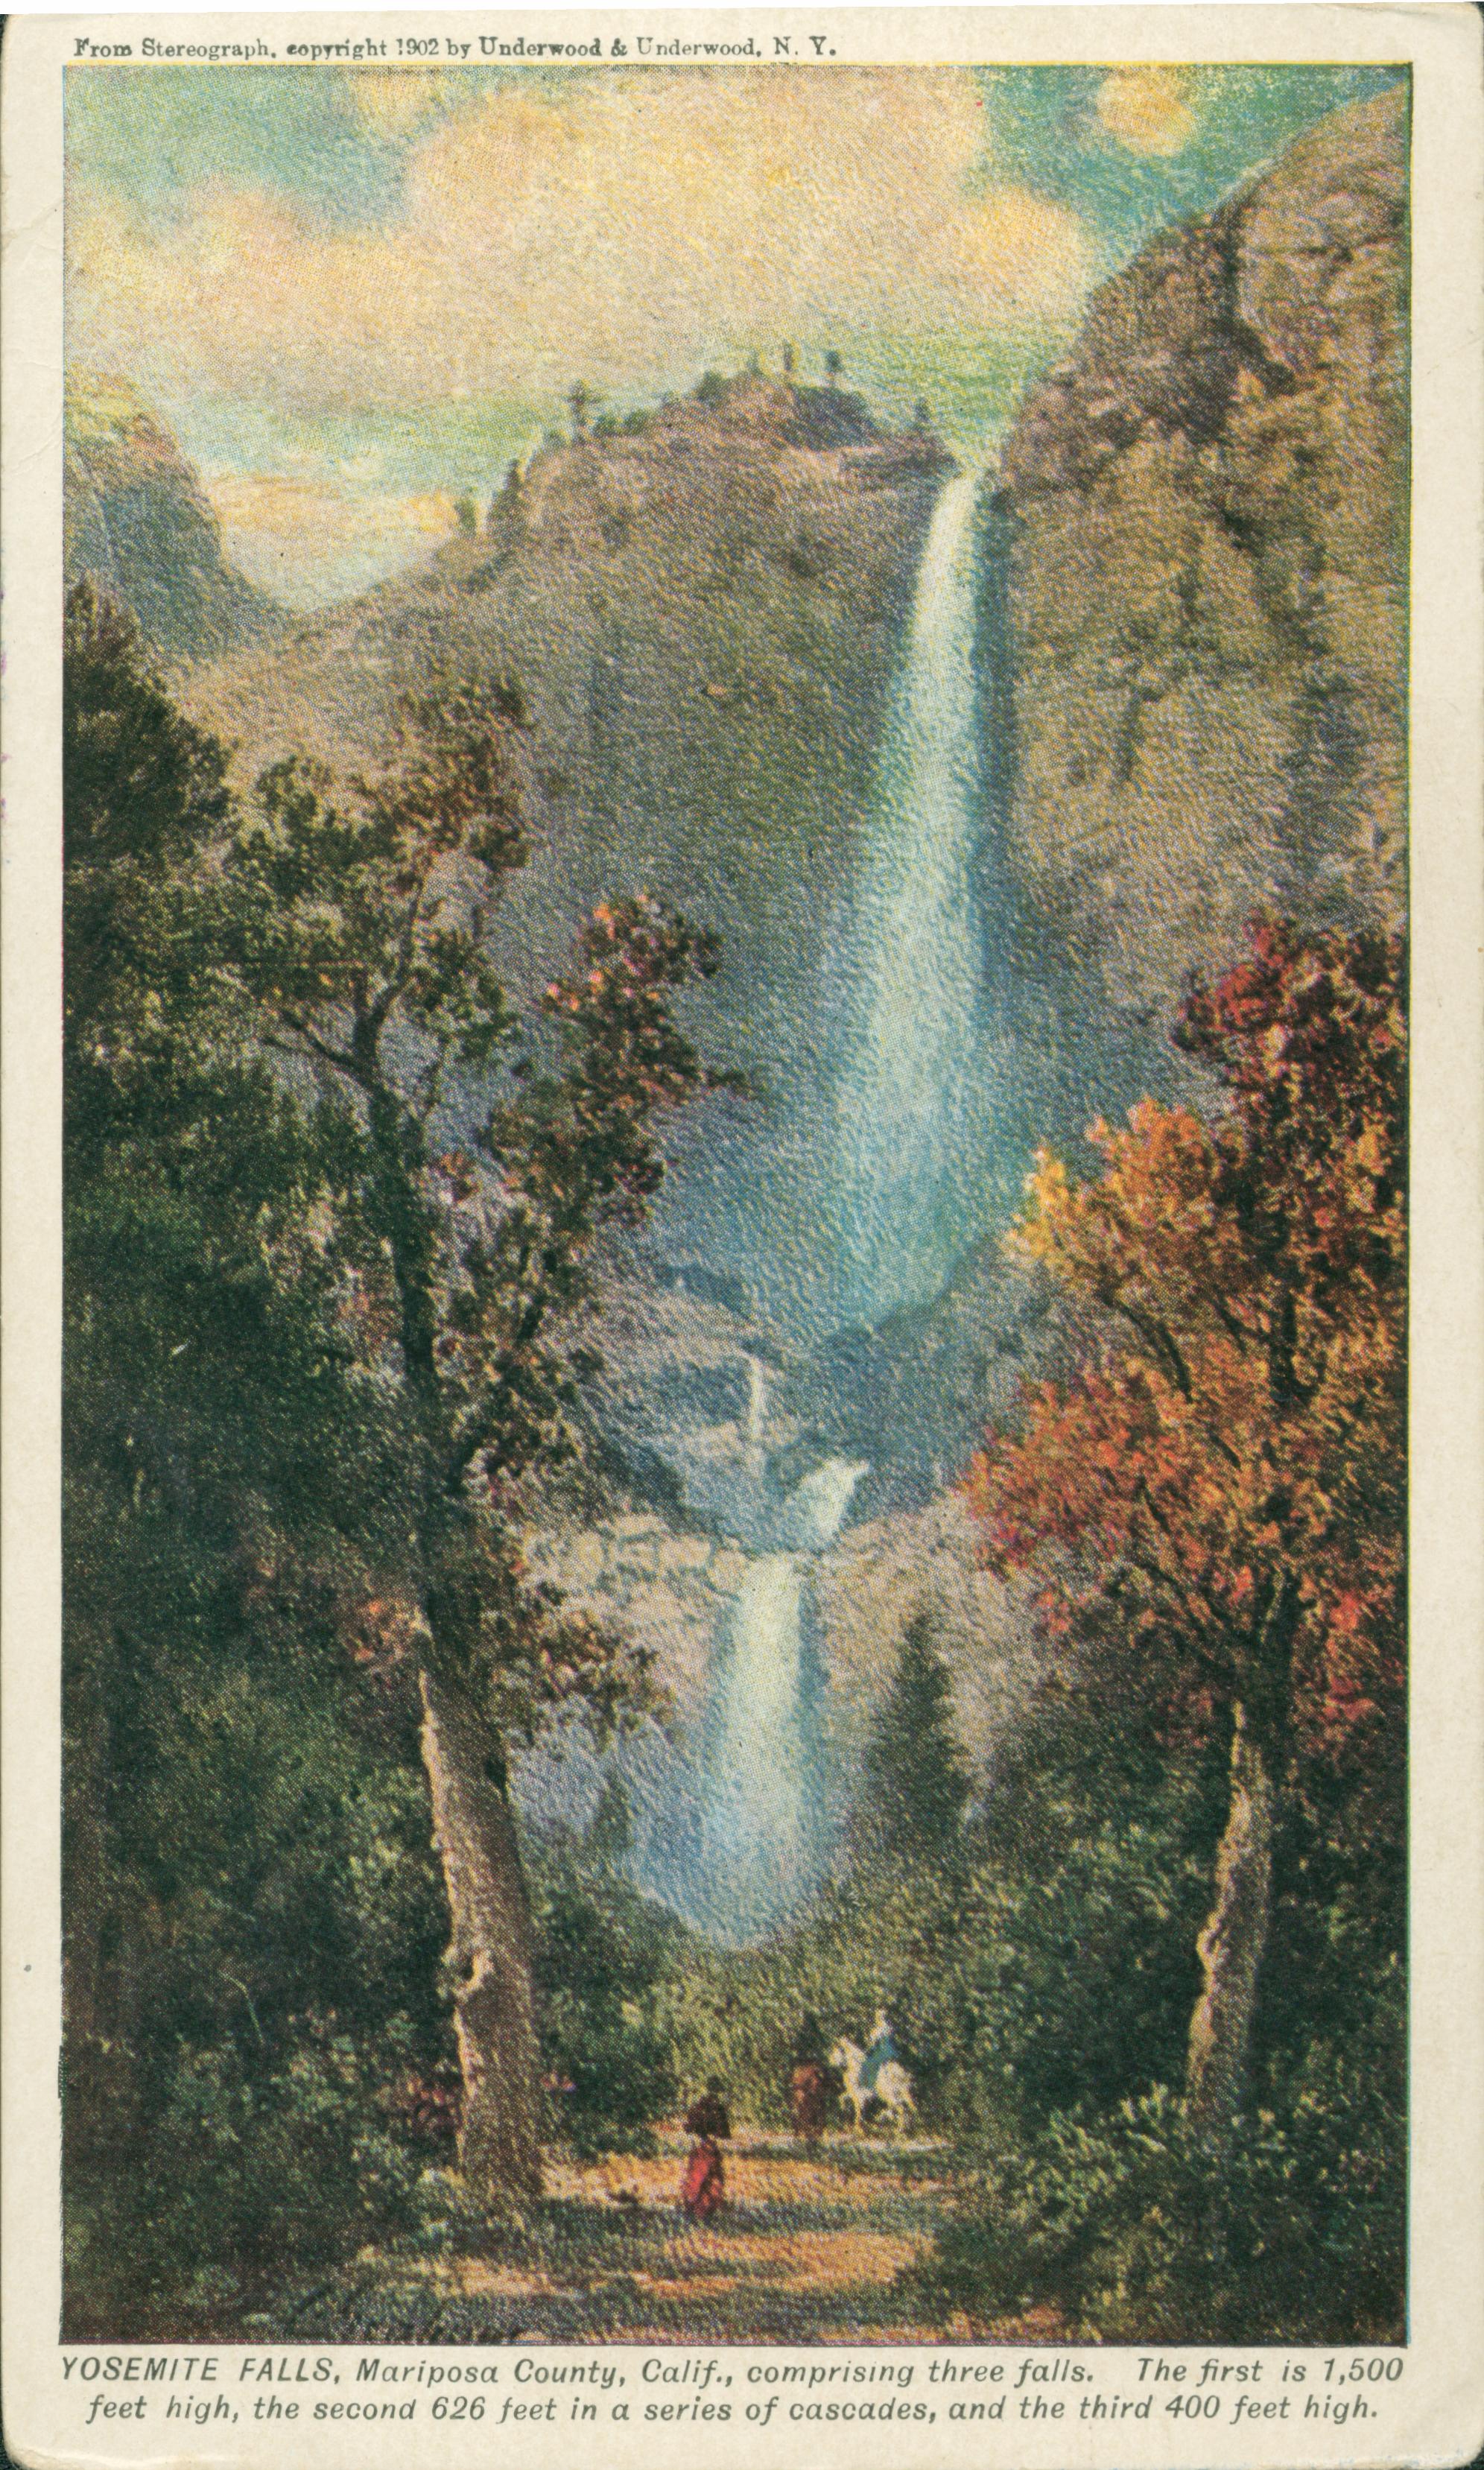 Shows a road with two hikers and a rider lined by trees with Yosemite Falls in the background